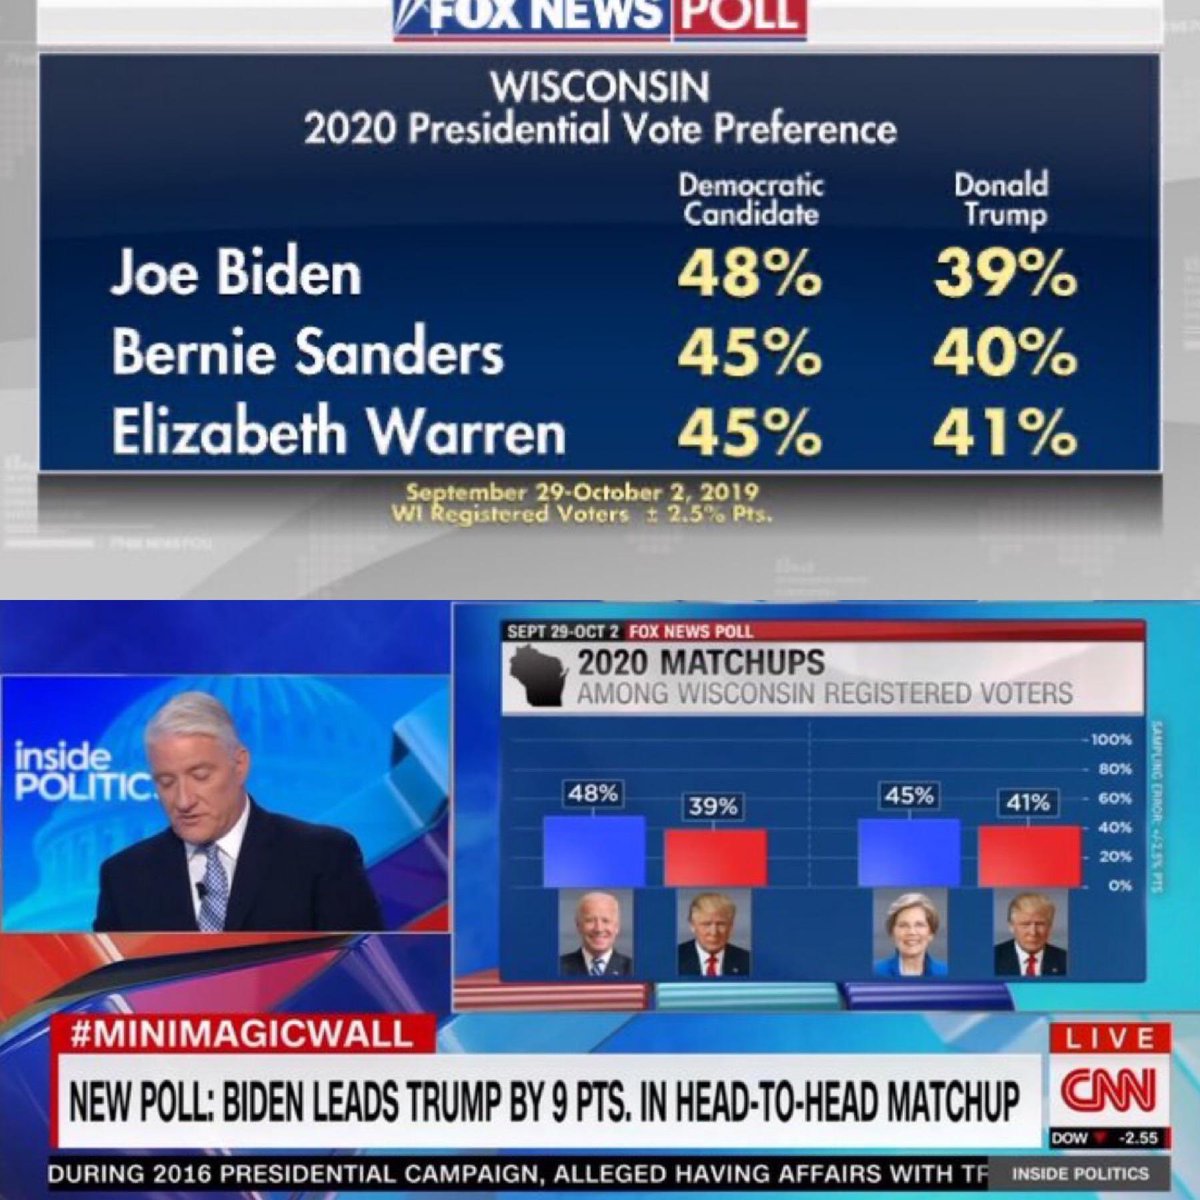 Even though he performed better than Warren, Sanders was completely missing from the CNN graphicFox coverage of the same poll is at the top